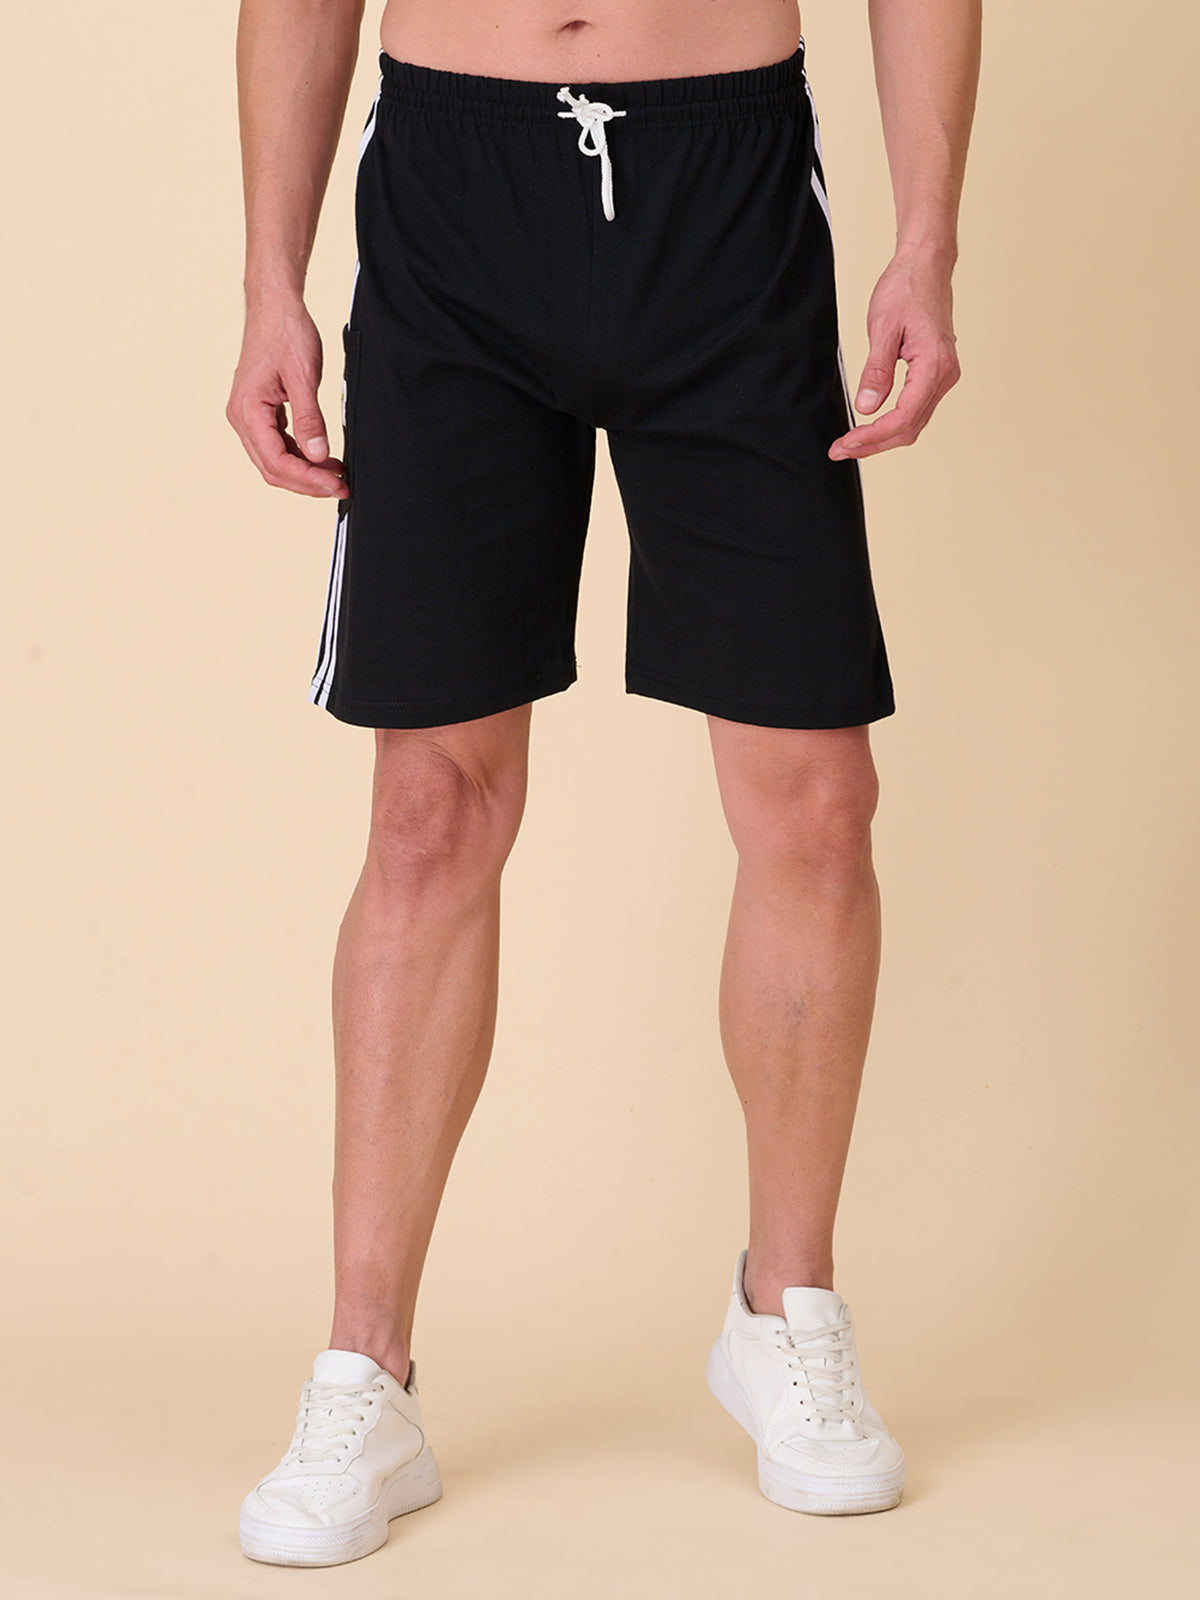 Cotton half pant for summer